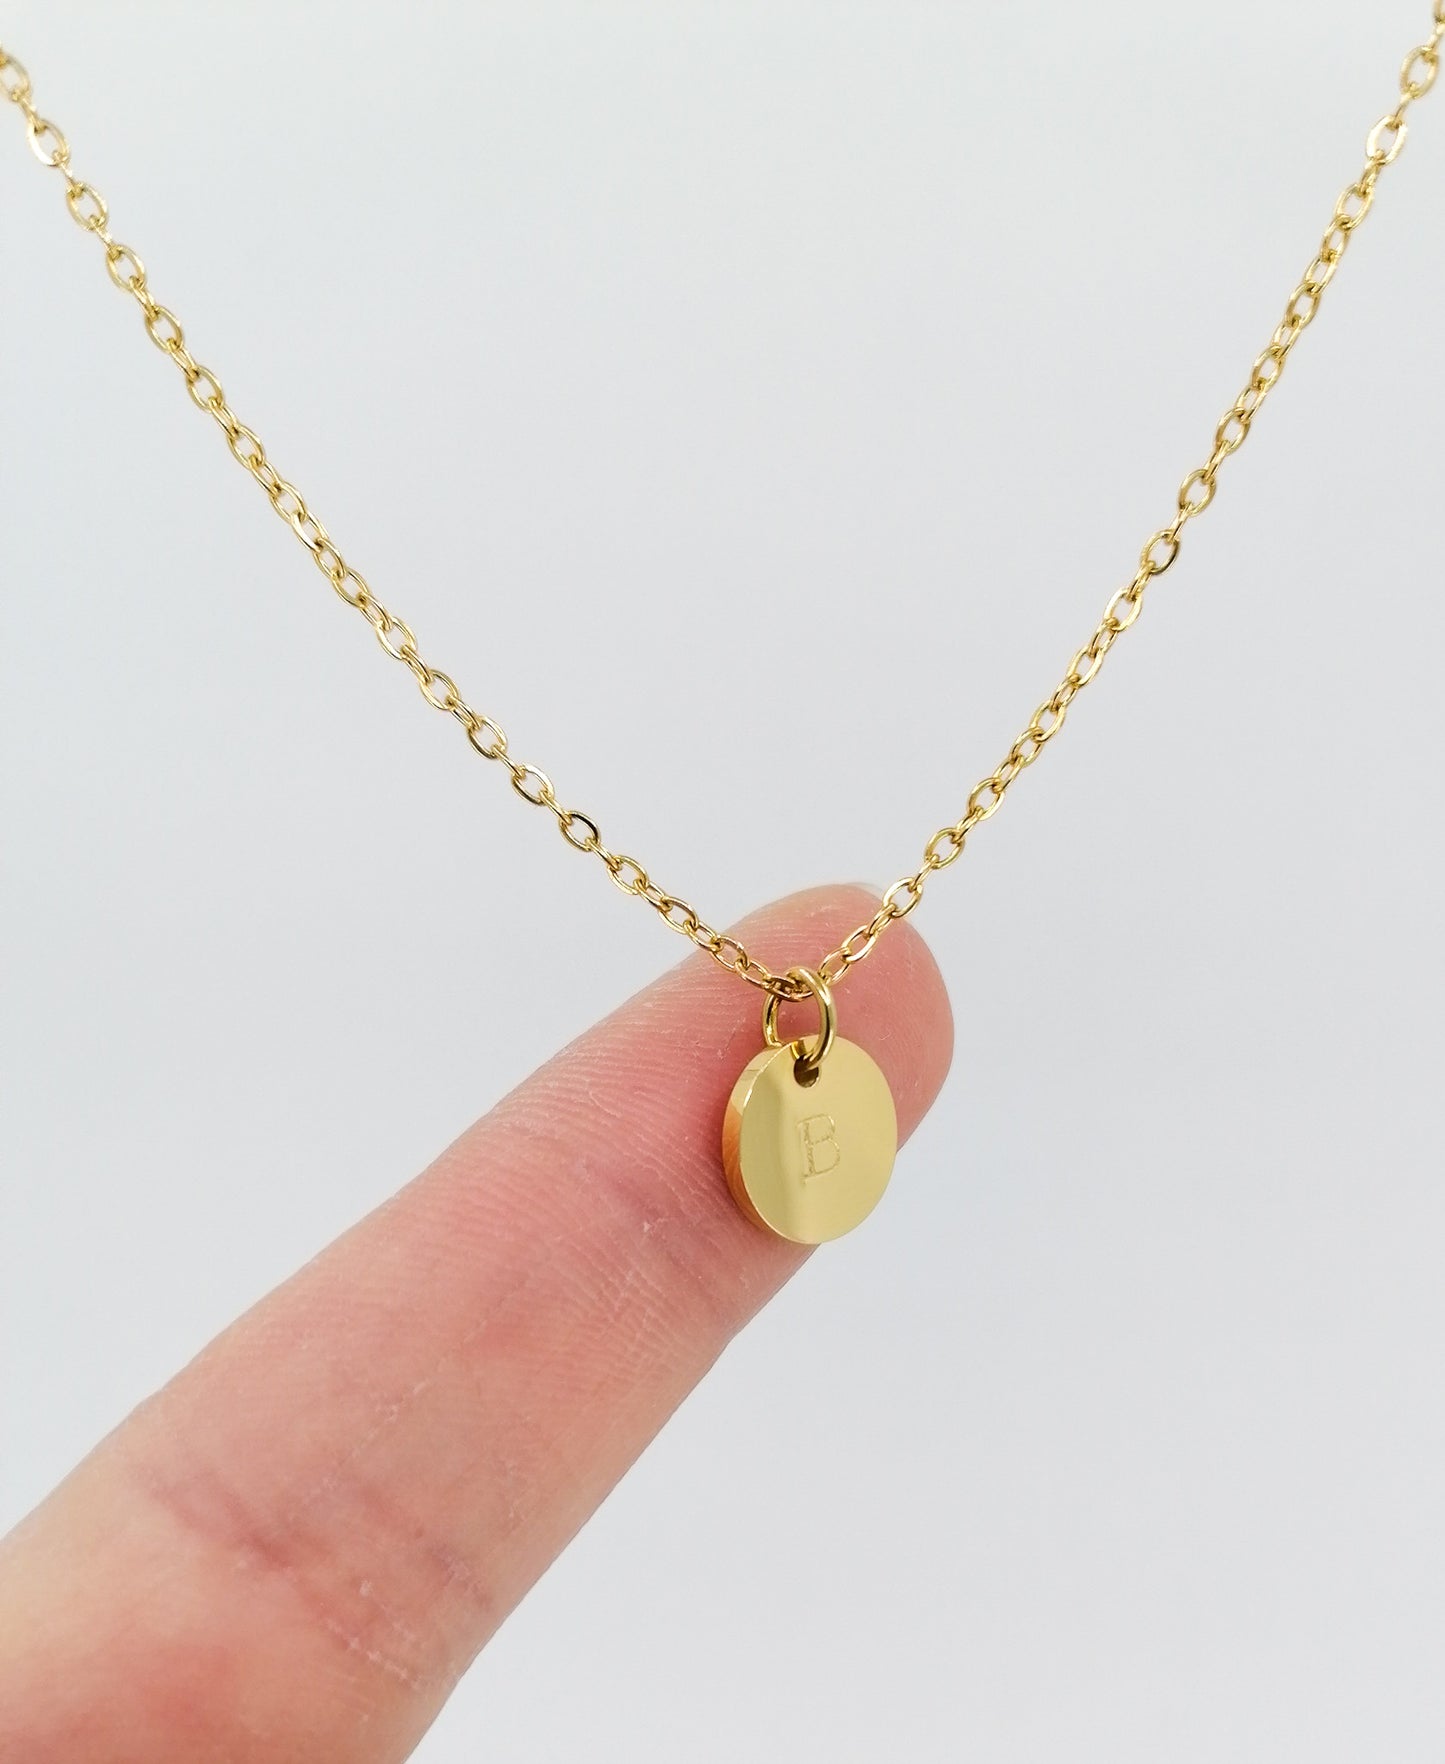 Initial necklace - dainty chain